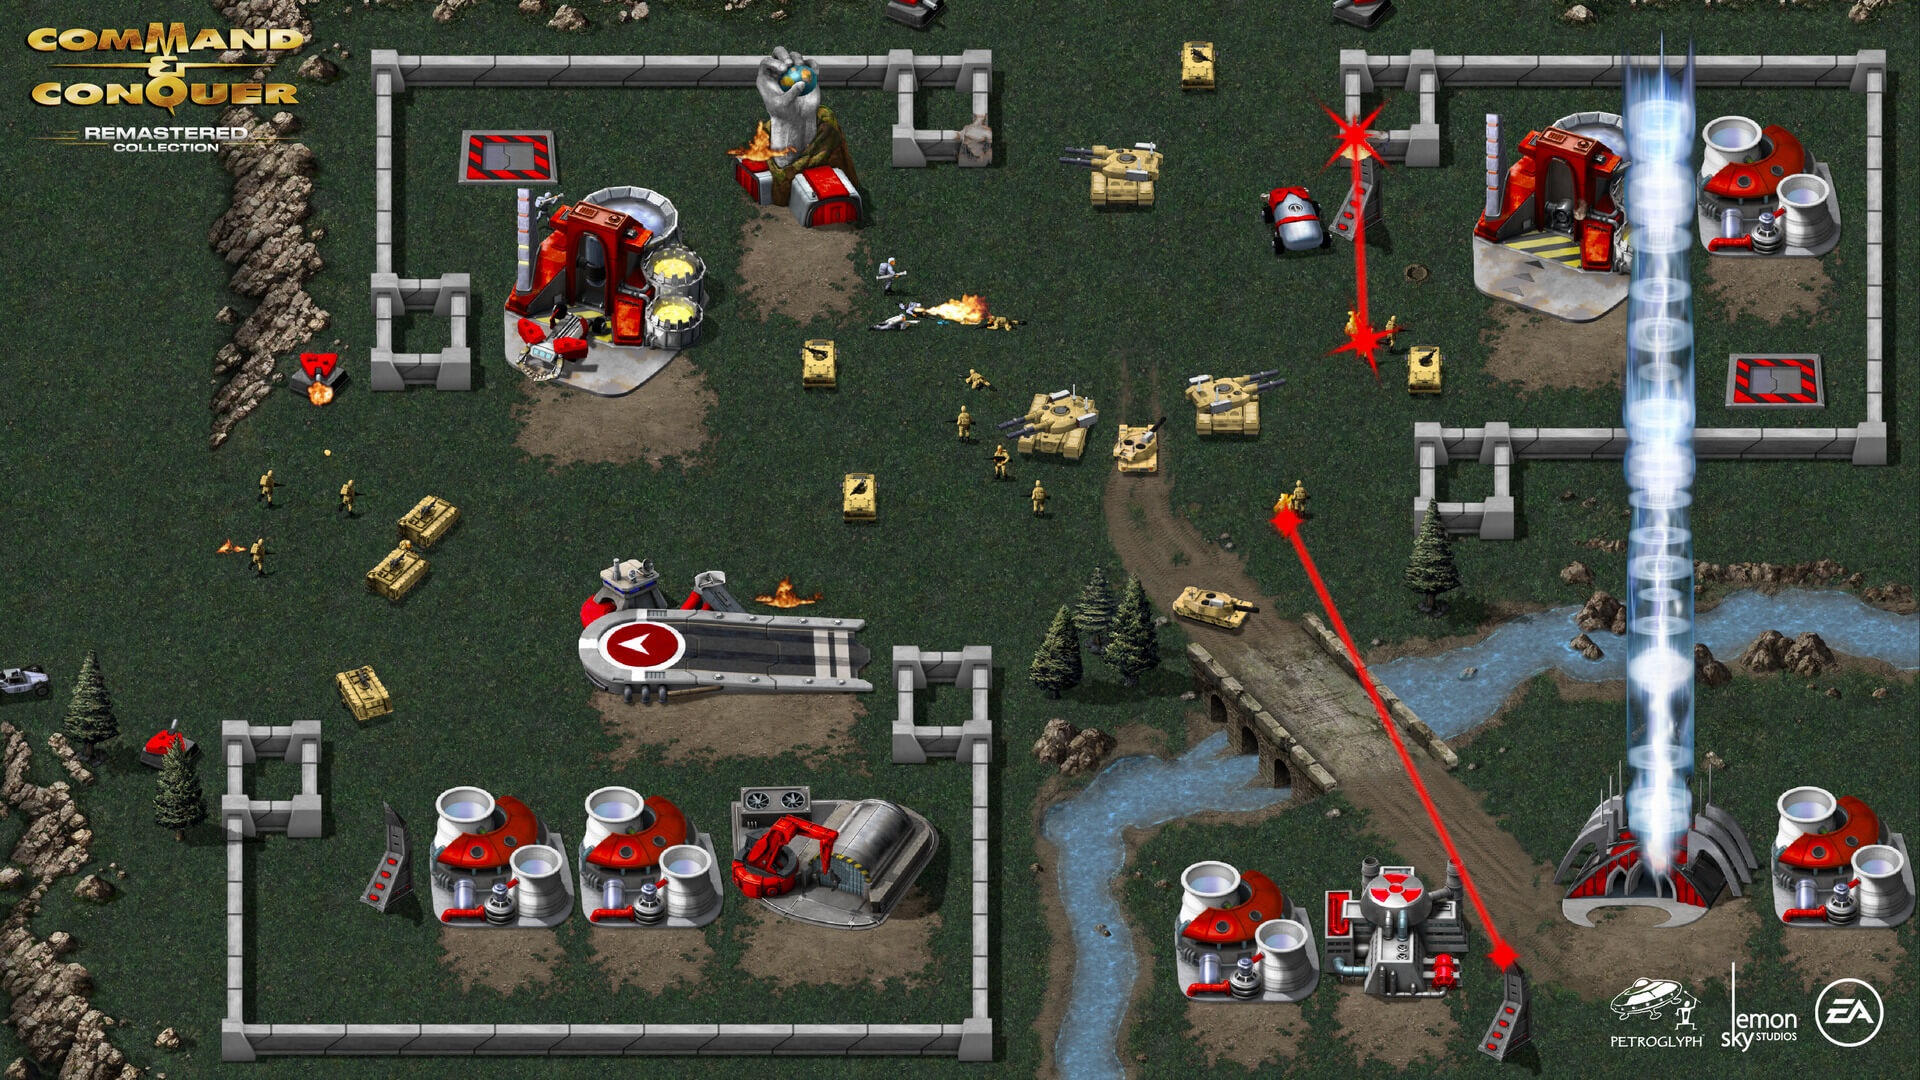 Steam command and conquer collection фото 17